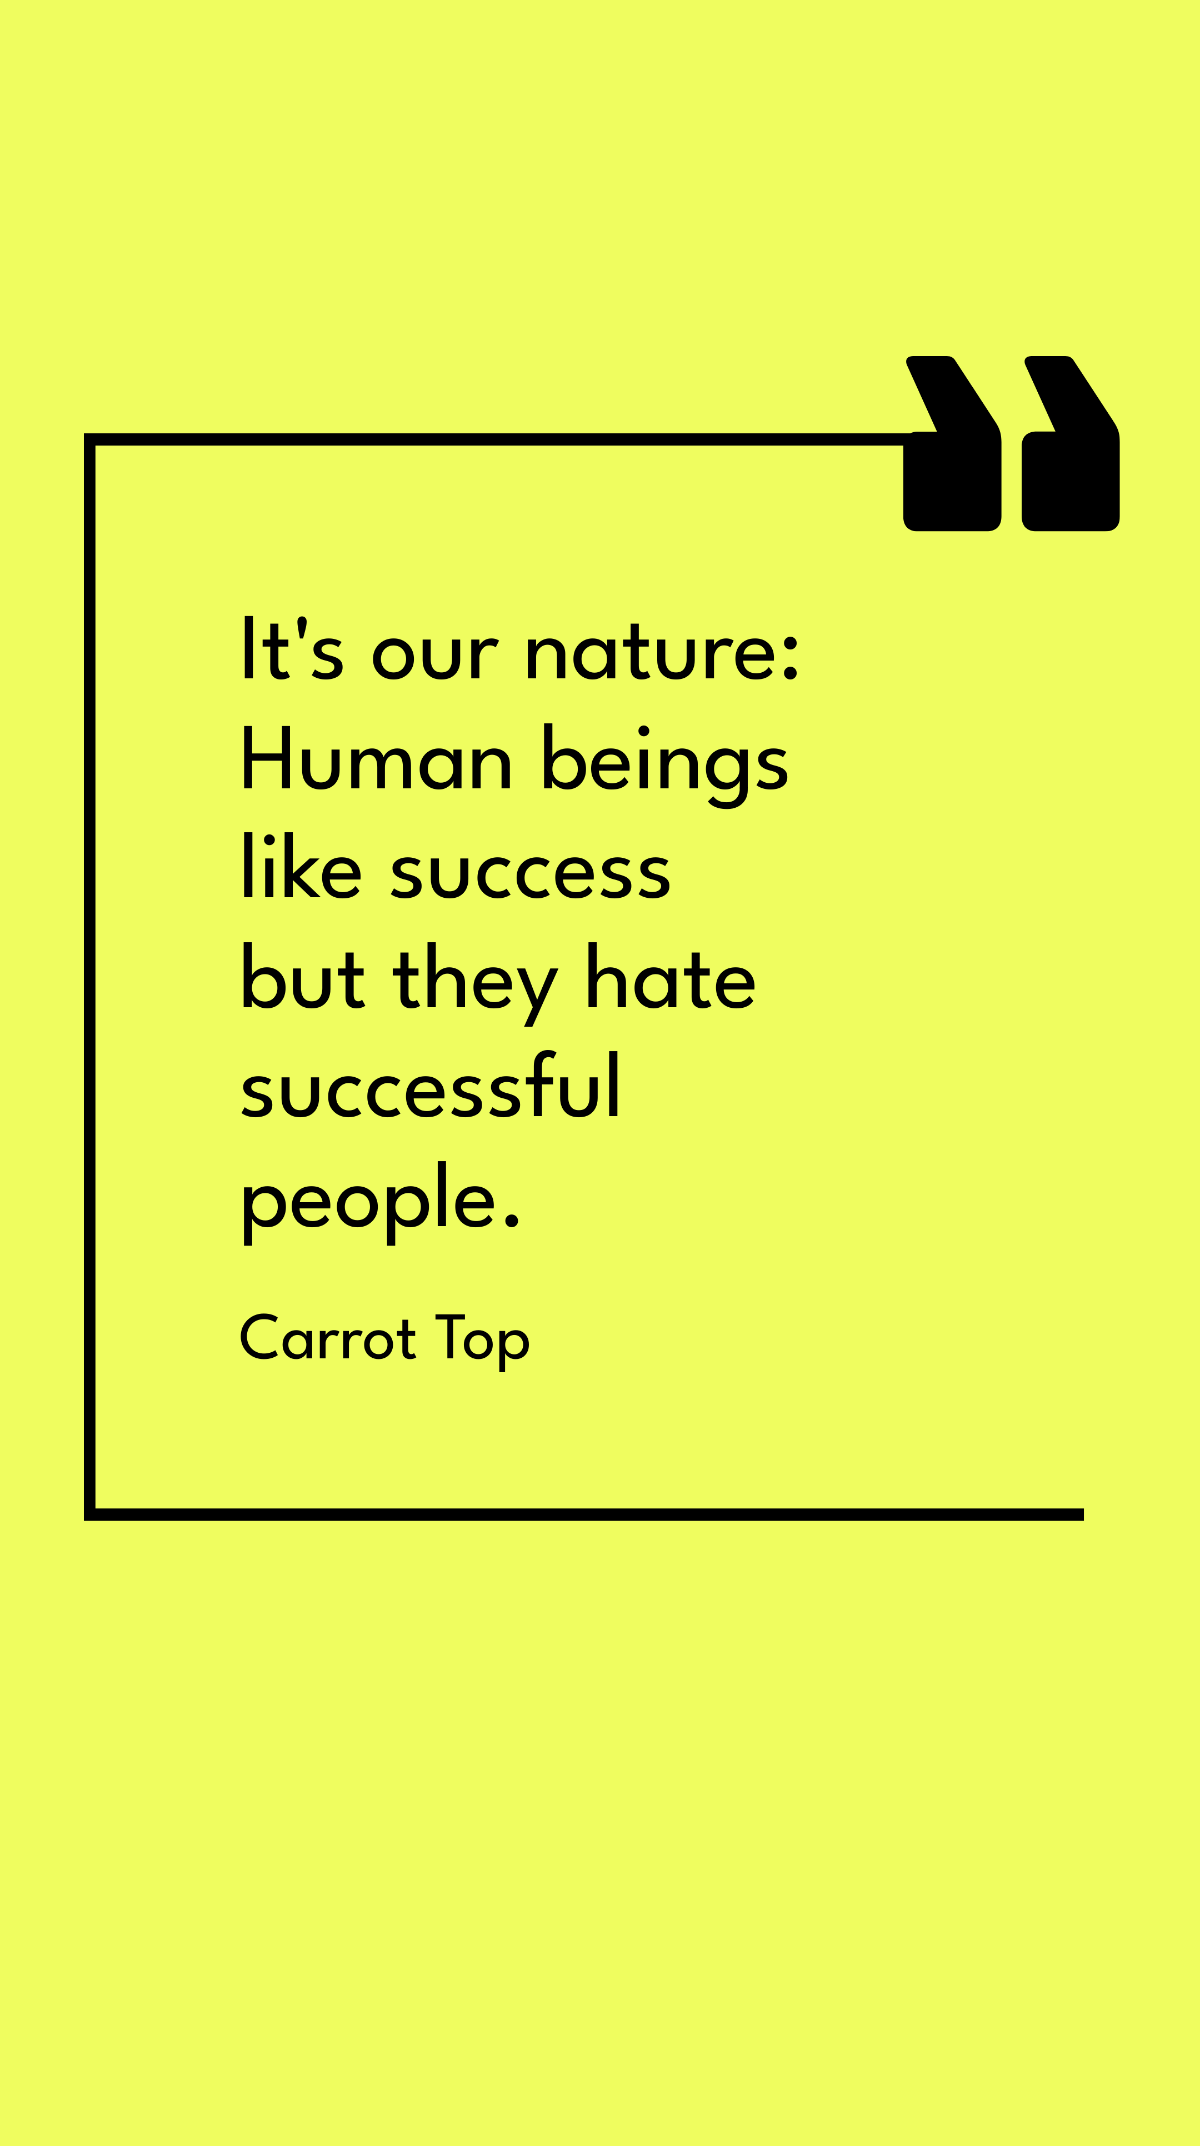 Carrot Top - It's our nature: Human beings like success but they hate successful people. Template